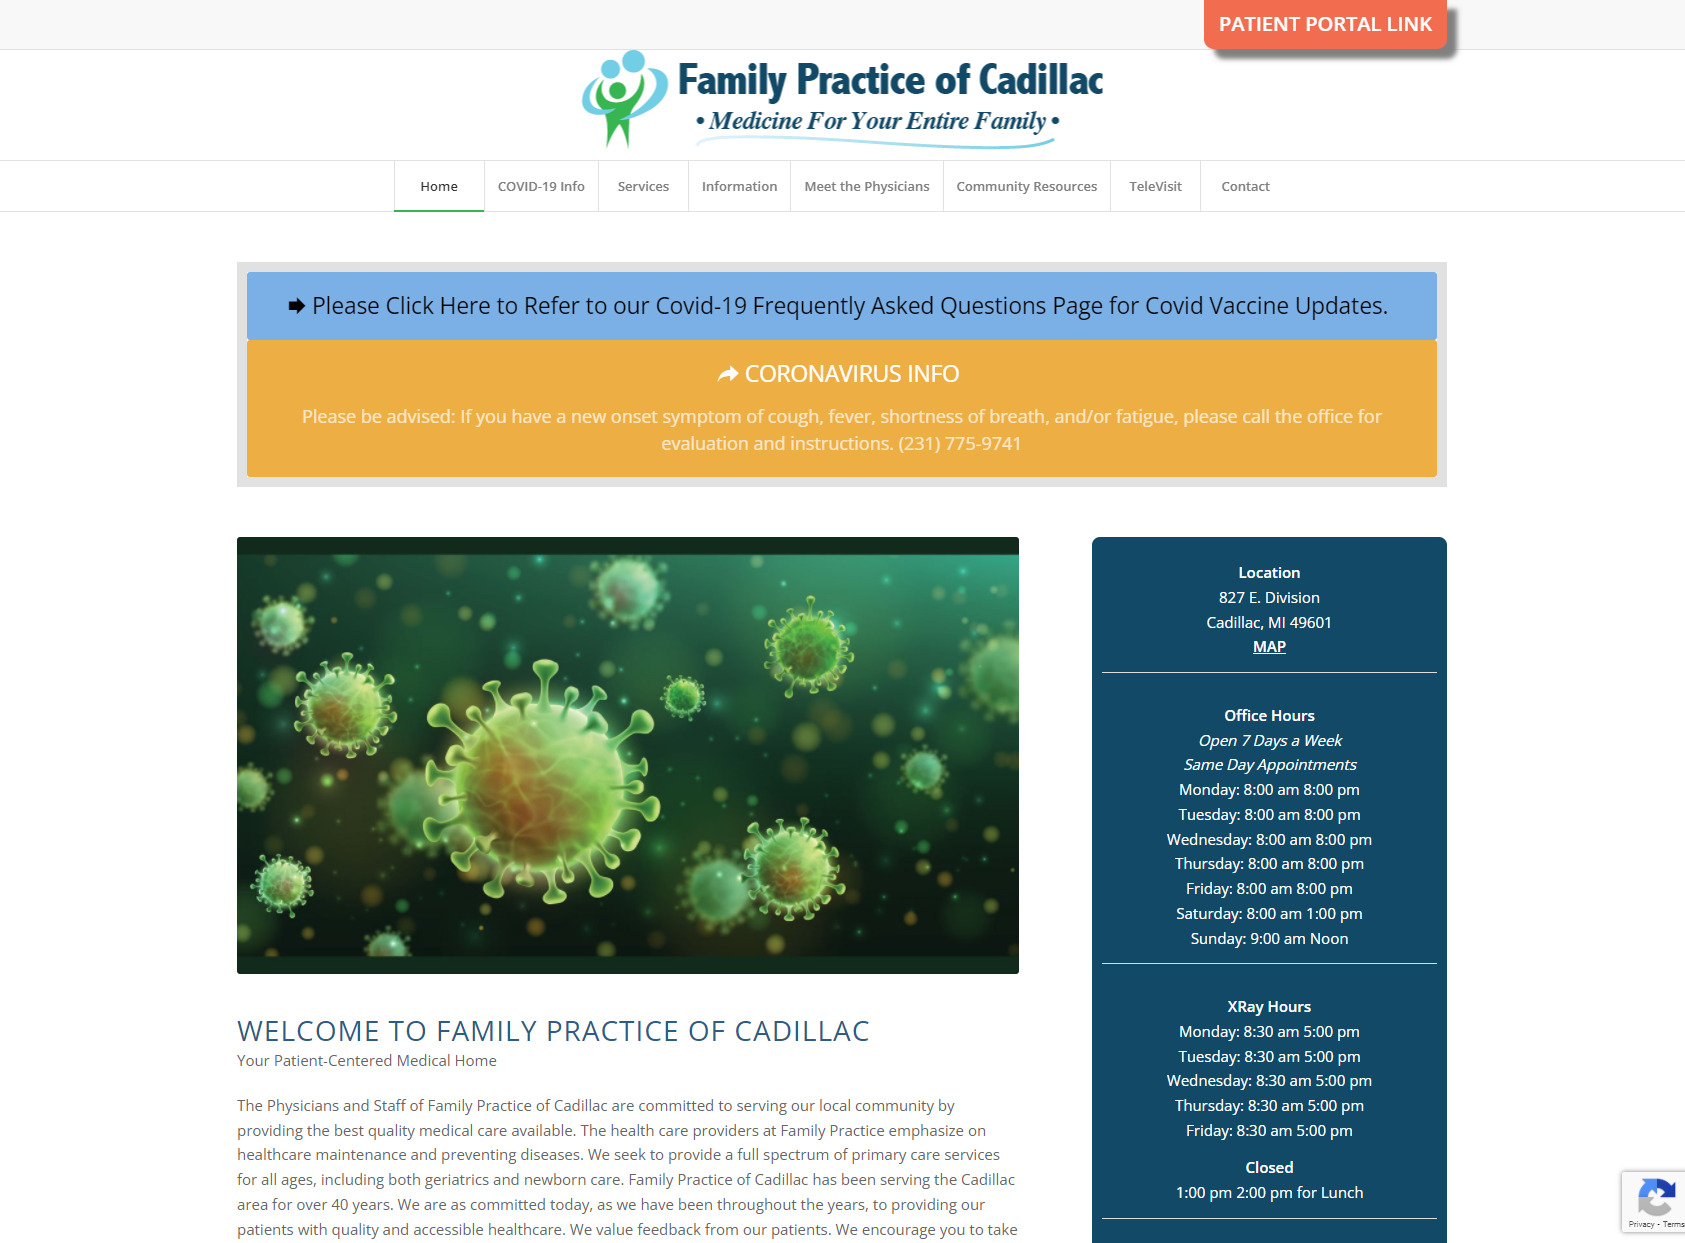 Family Practice of Cadillac